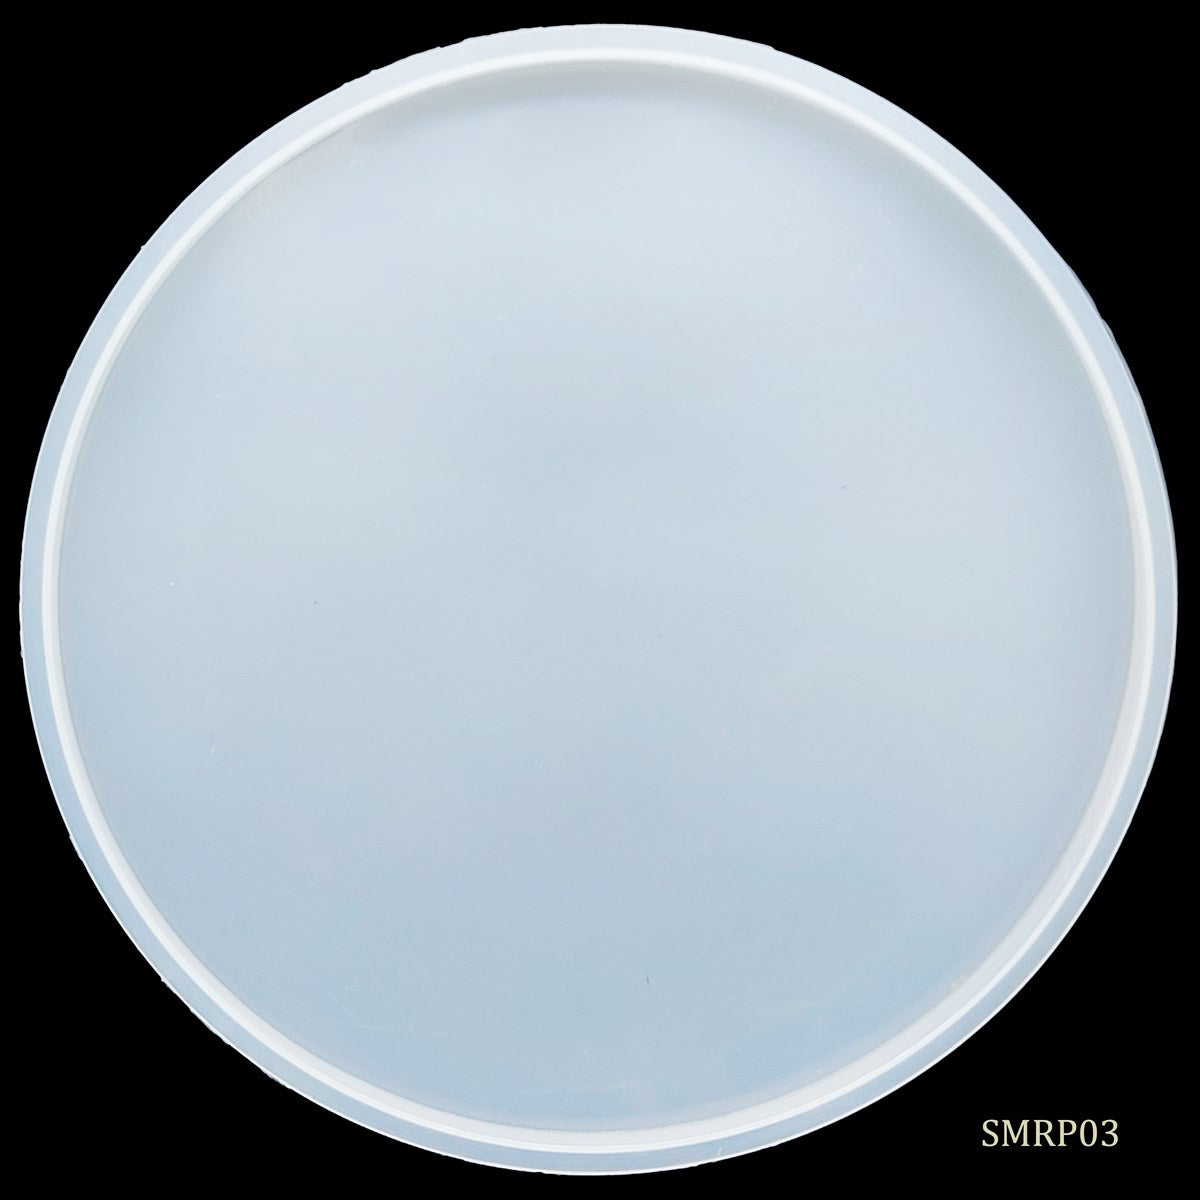 jags-mumbai Mould Silicone Mould Round Plate 12inch SMRP03